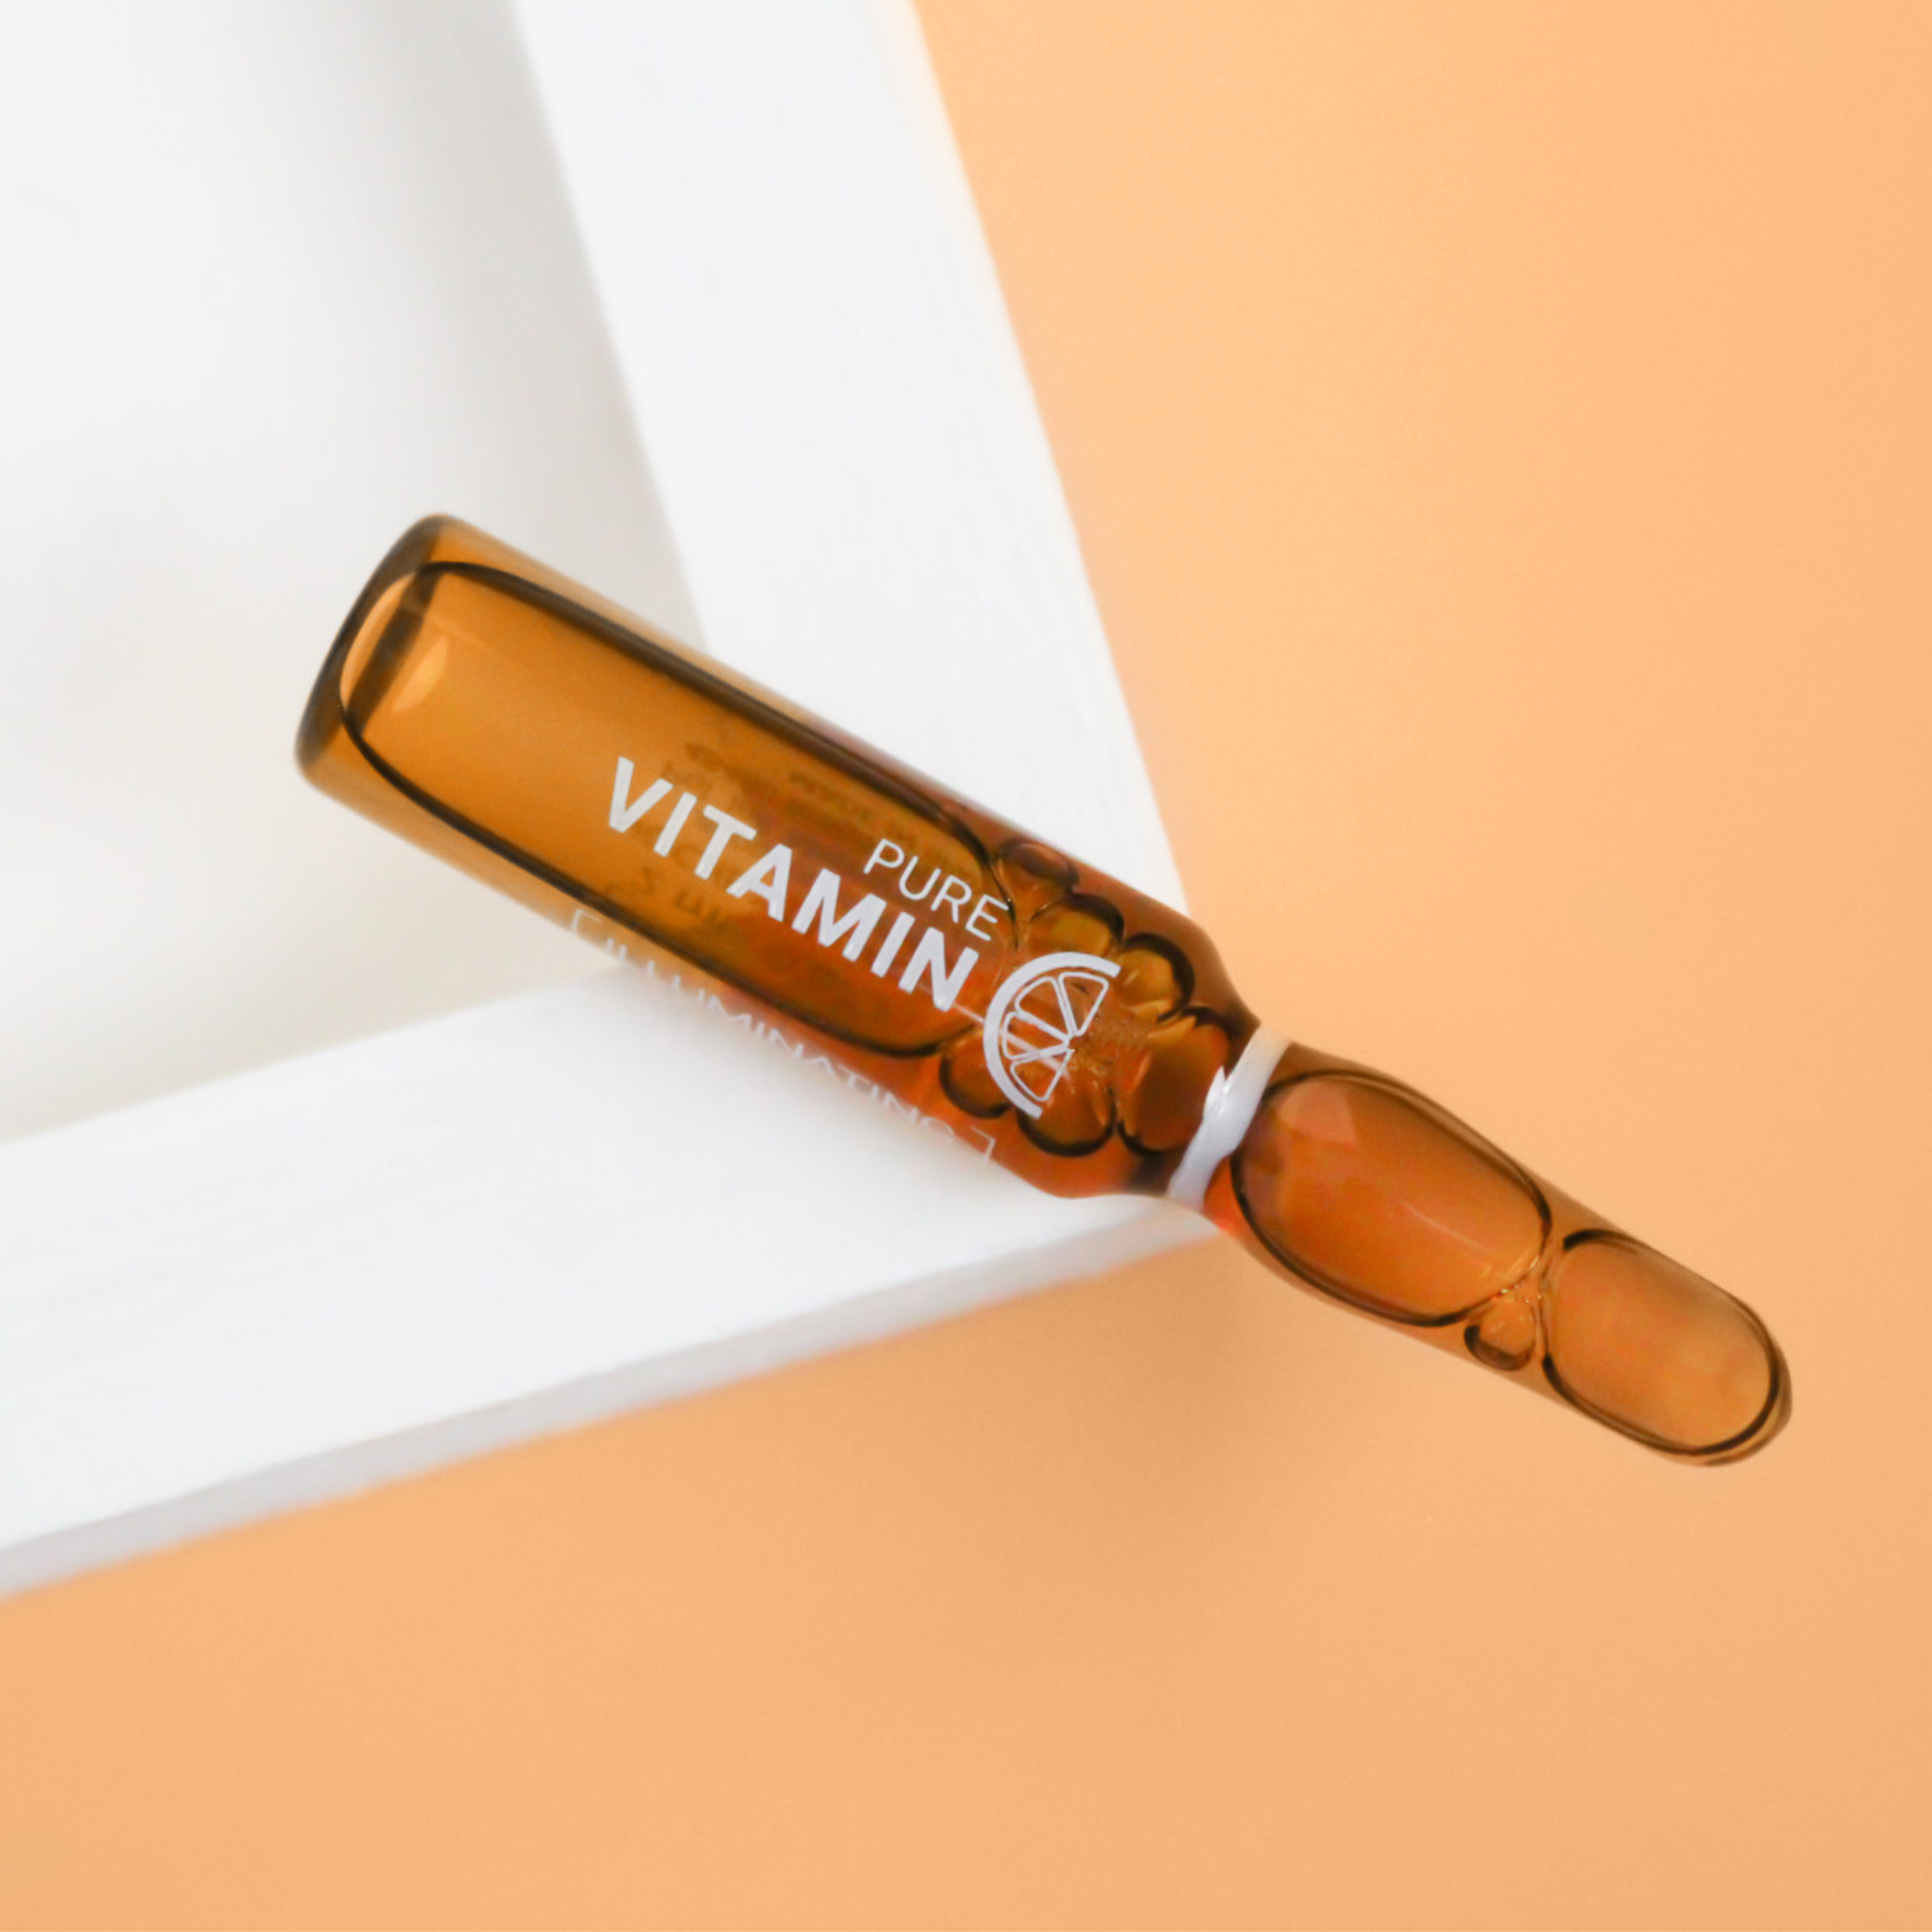 Vitamin C Ampoule laying on a white corner on top of an orange background